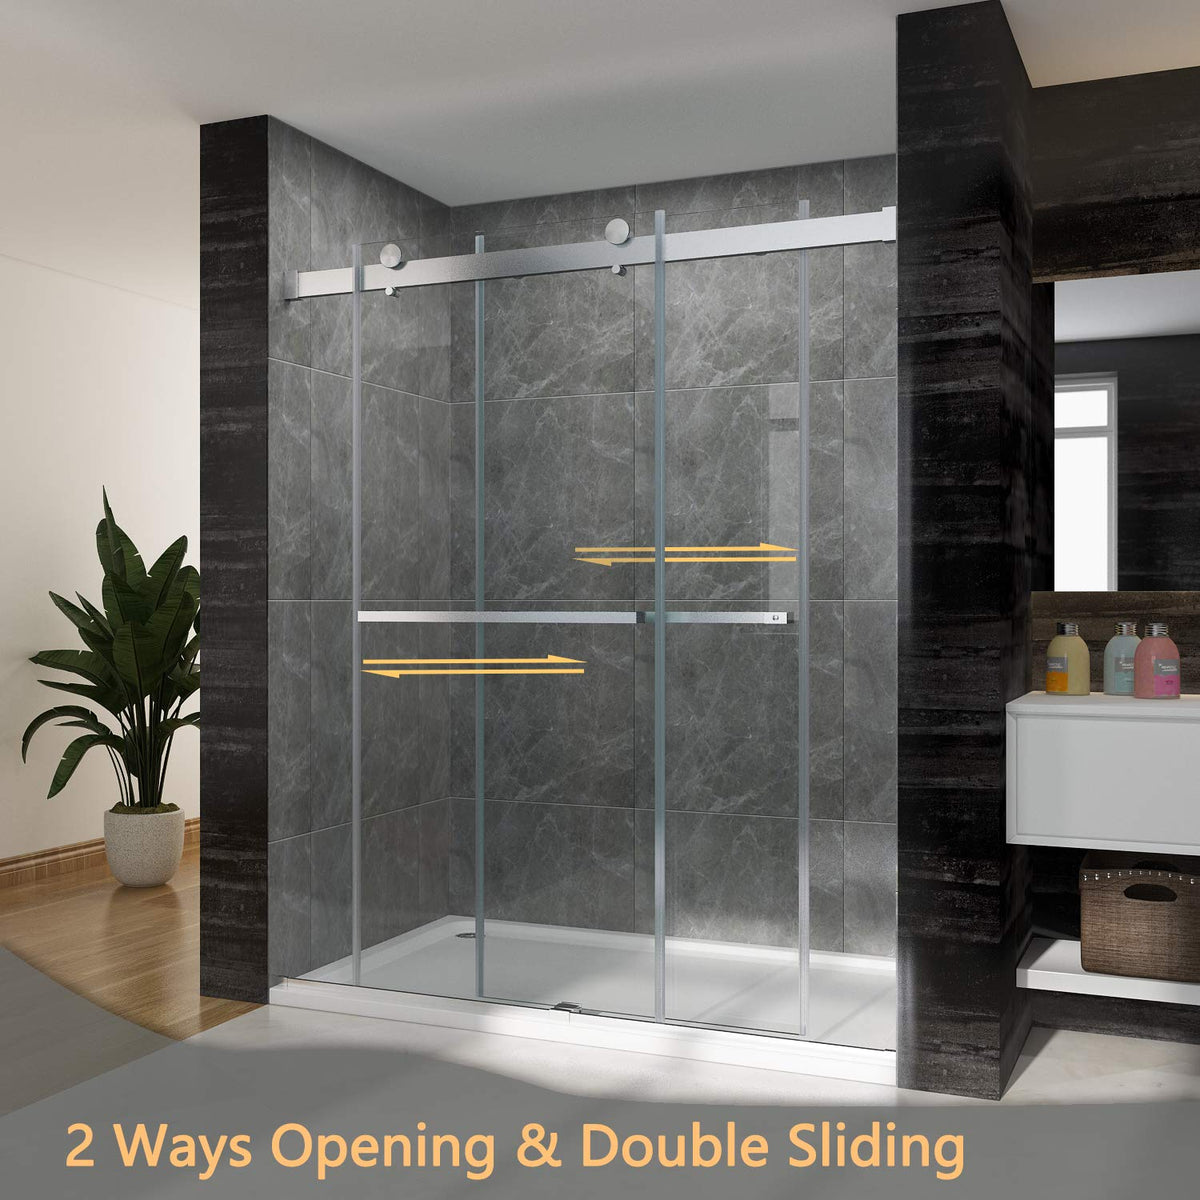 Both left and right glass panel can sliding at the same time, you can move it however you want.